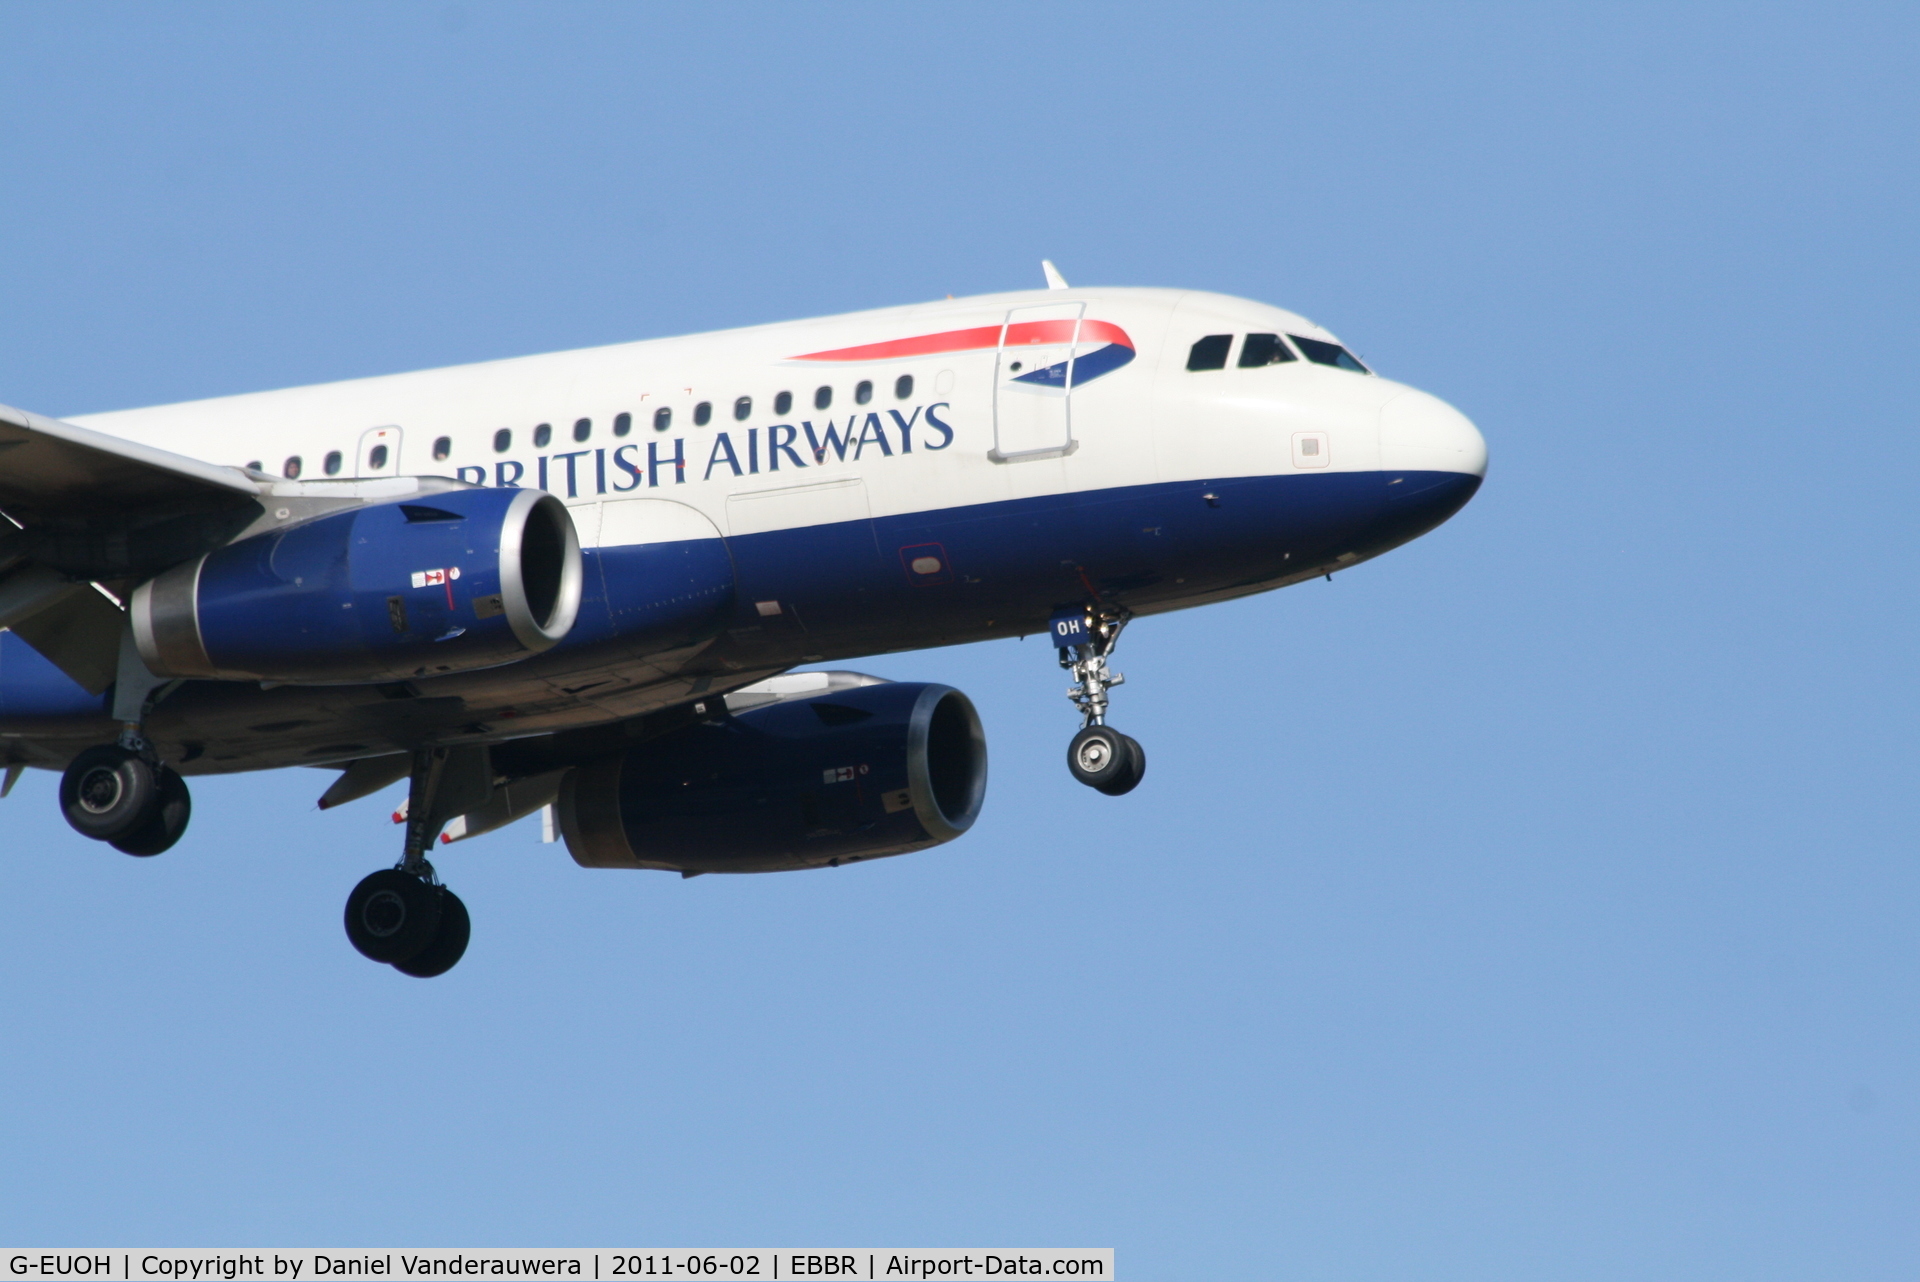 G-EUOH, 2001 Airbus A319-131 C/N 1604, Arrival of flight BA388 to RWY 02